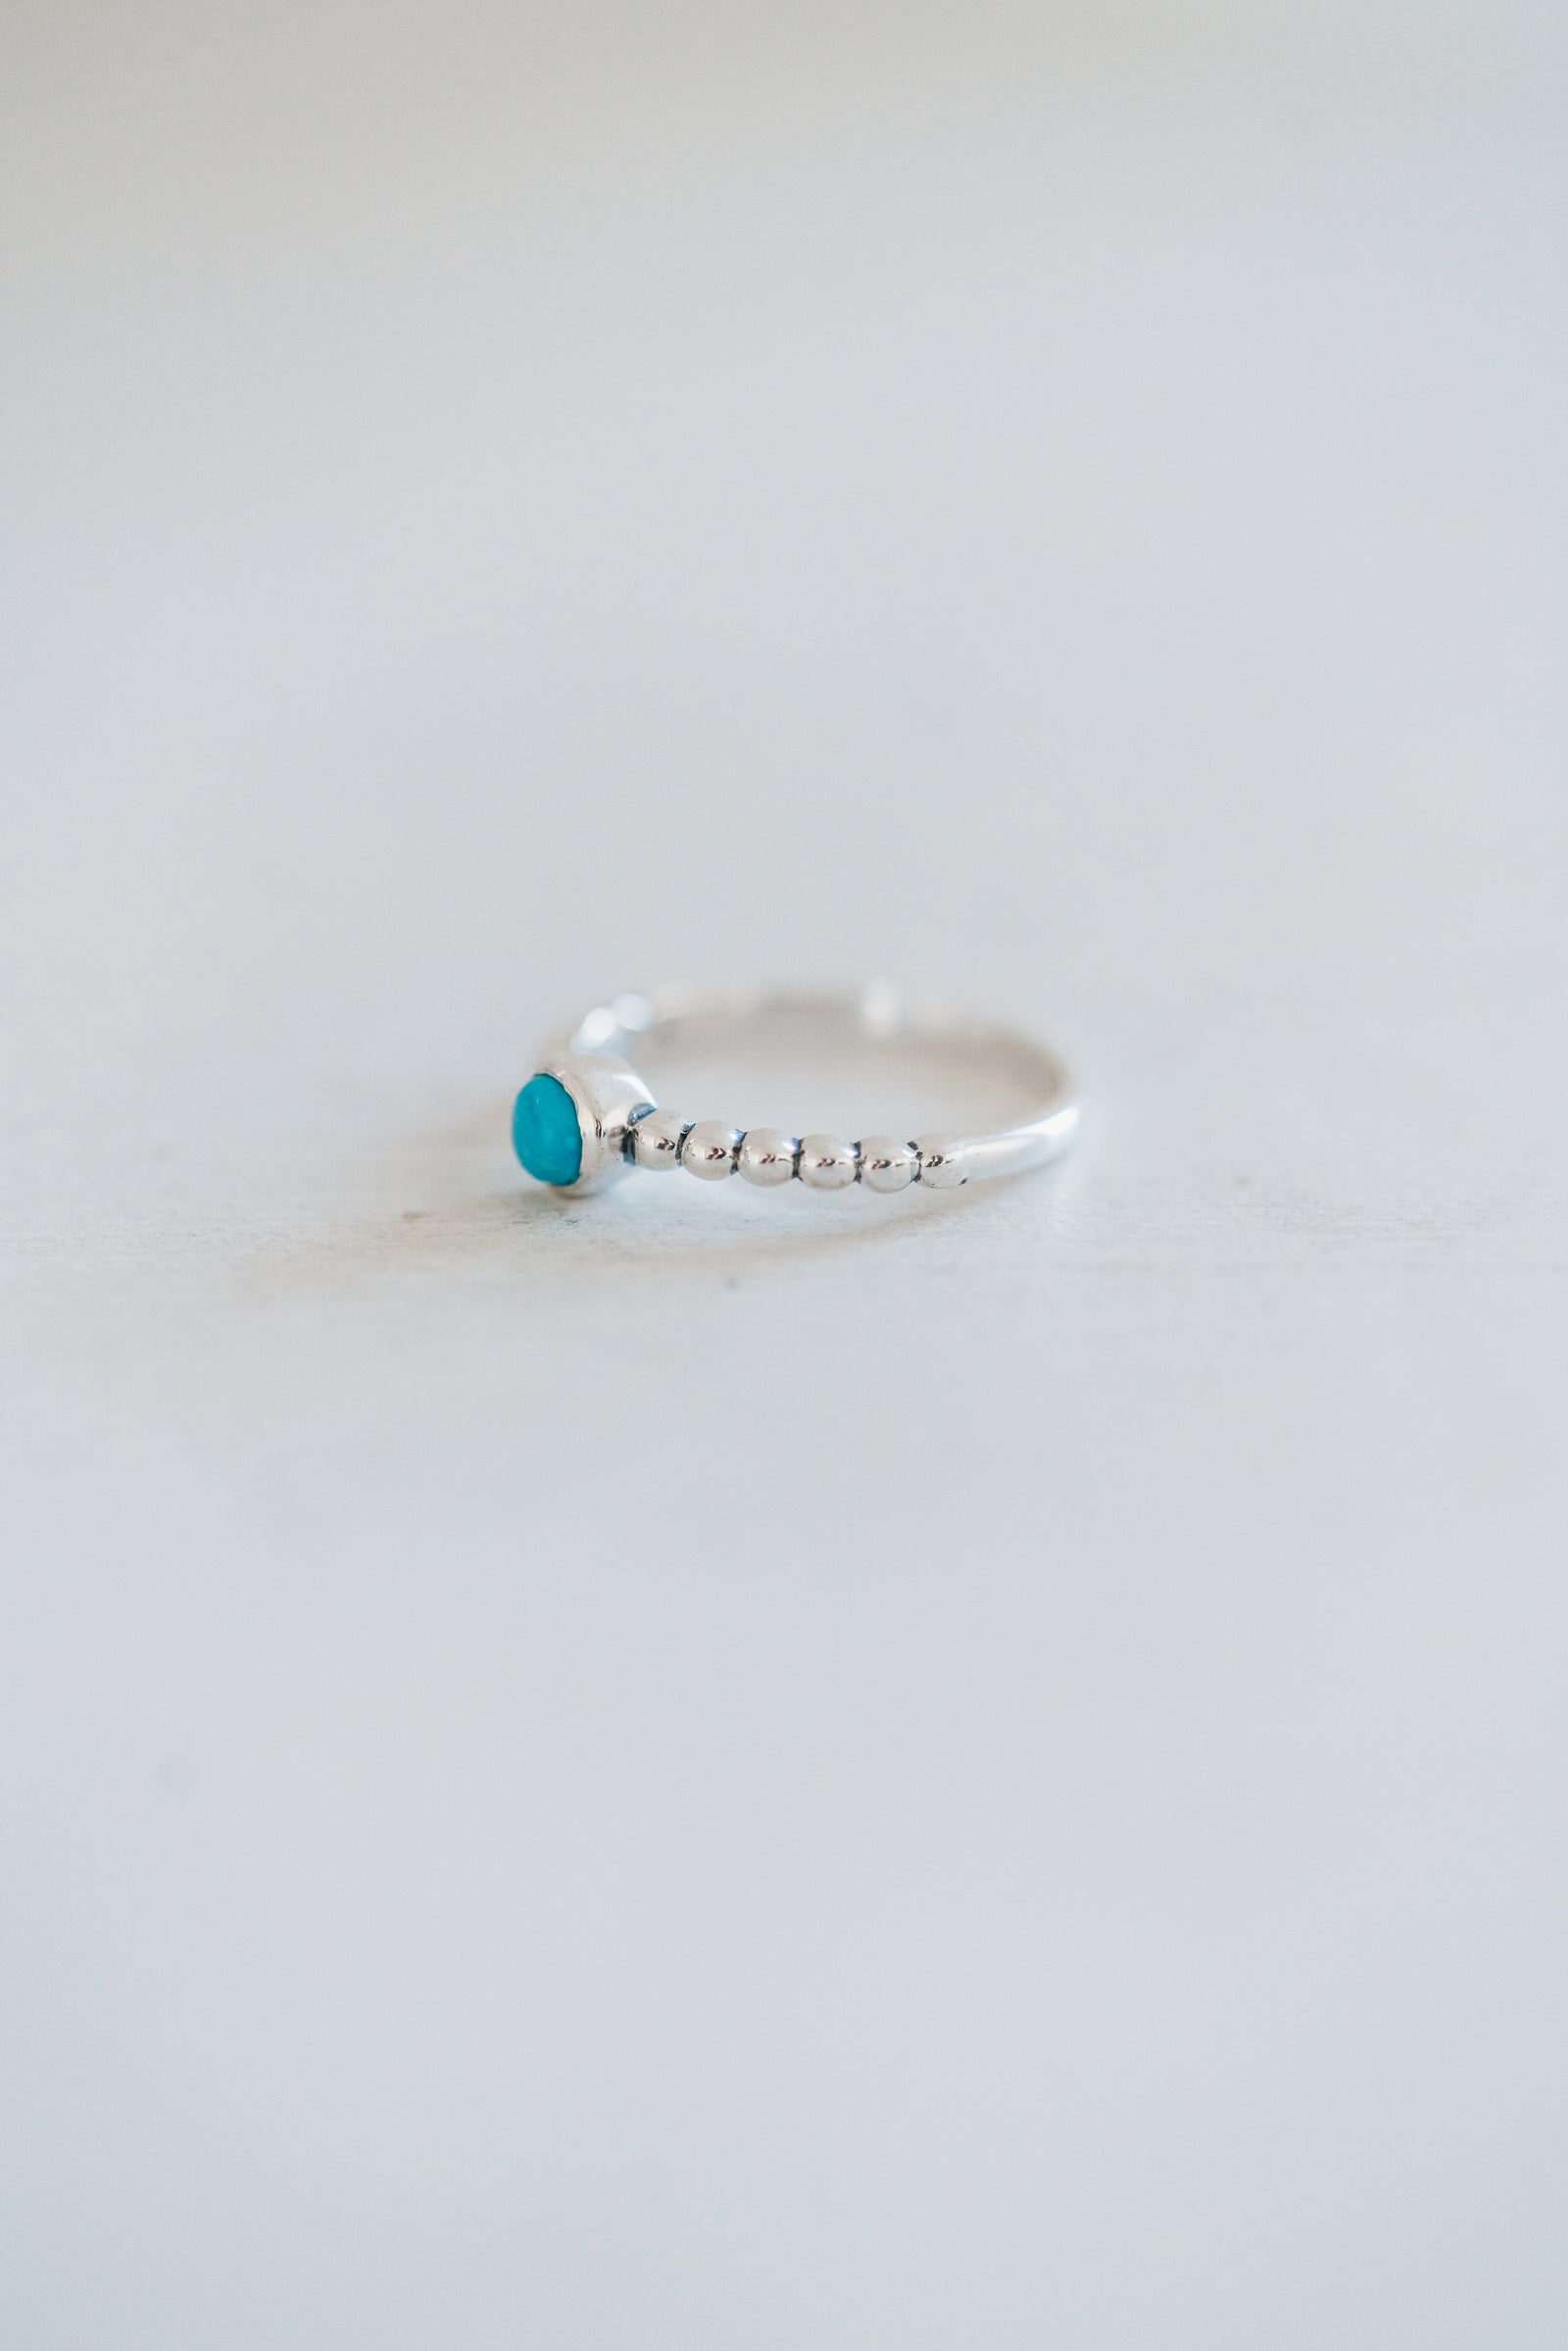 Chanel Ring | Turquoise